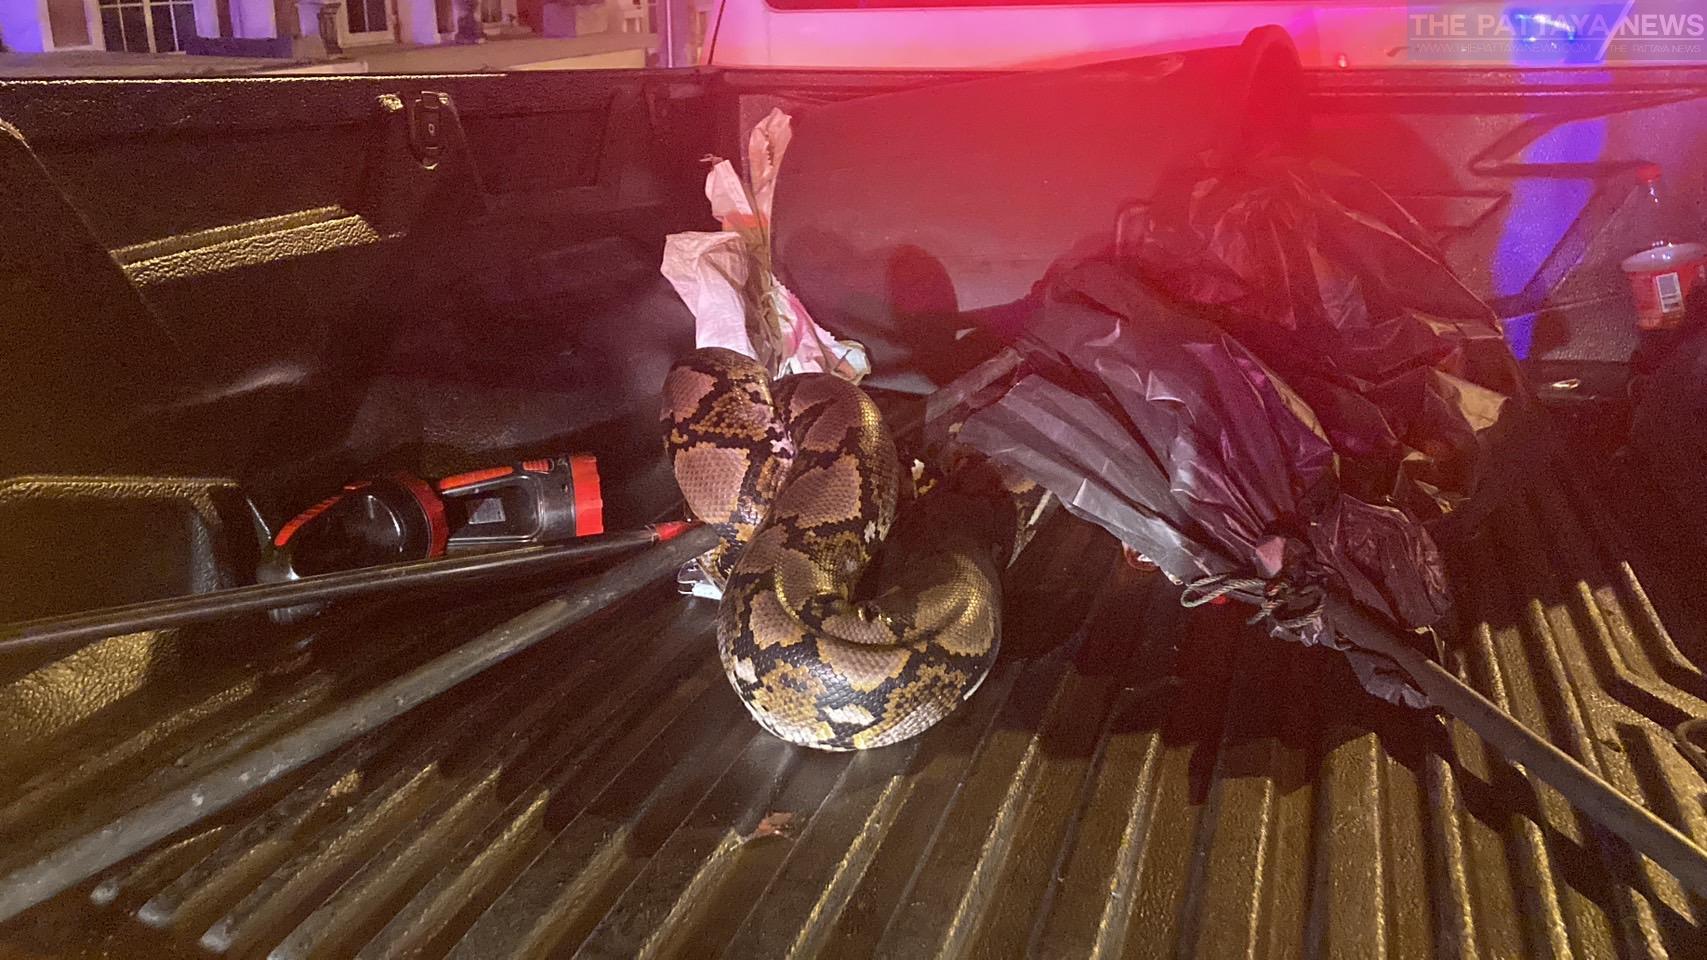 unlucky-pattaya-rescuer-gets-scared-and-falls-out-of-his-truck-after-python-escapes-on-truck's-bed-–-the-pattaya-news